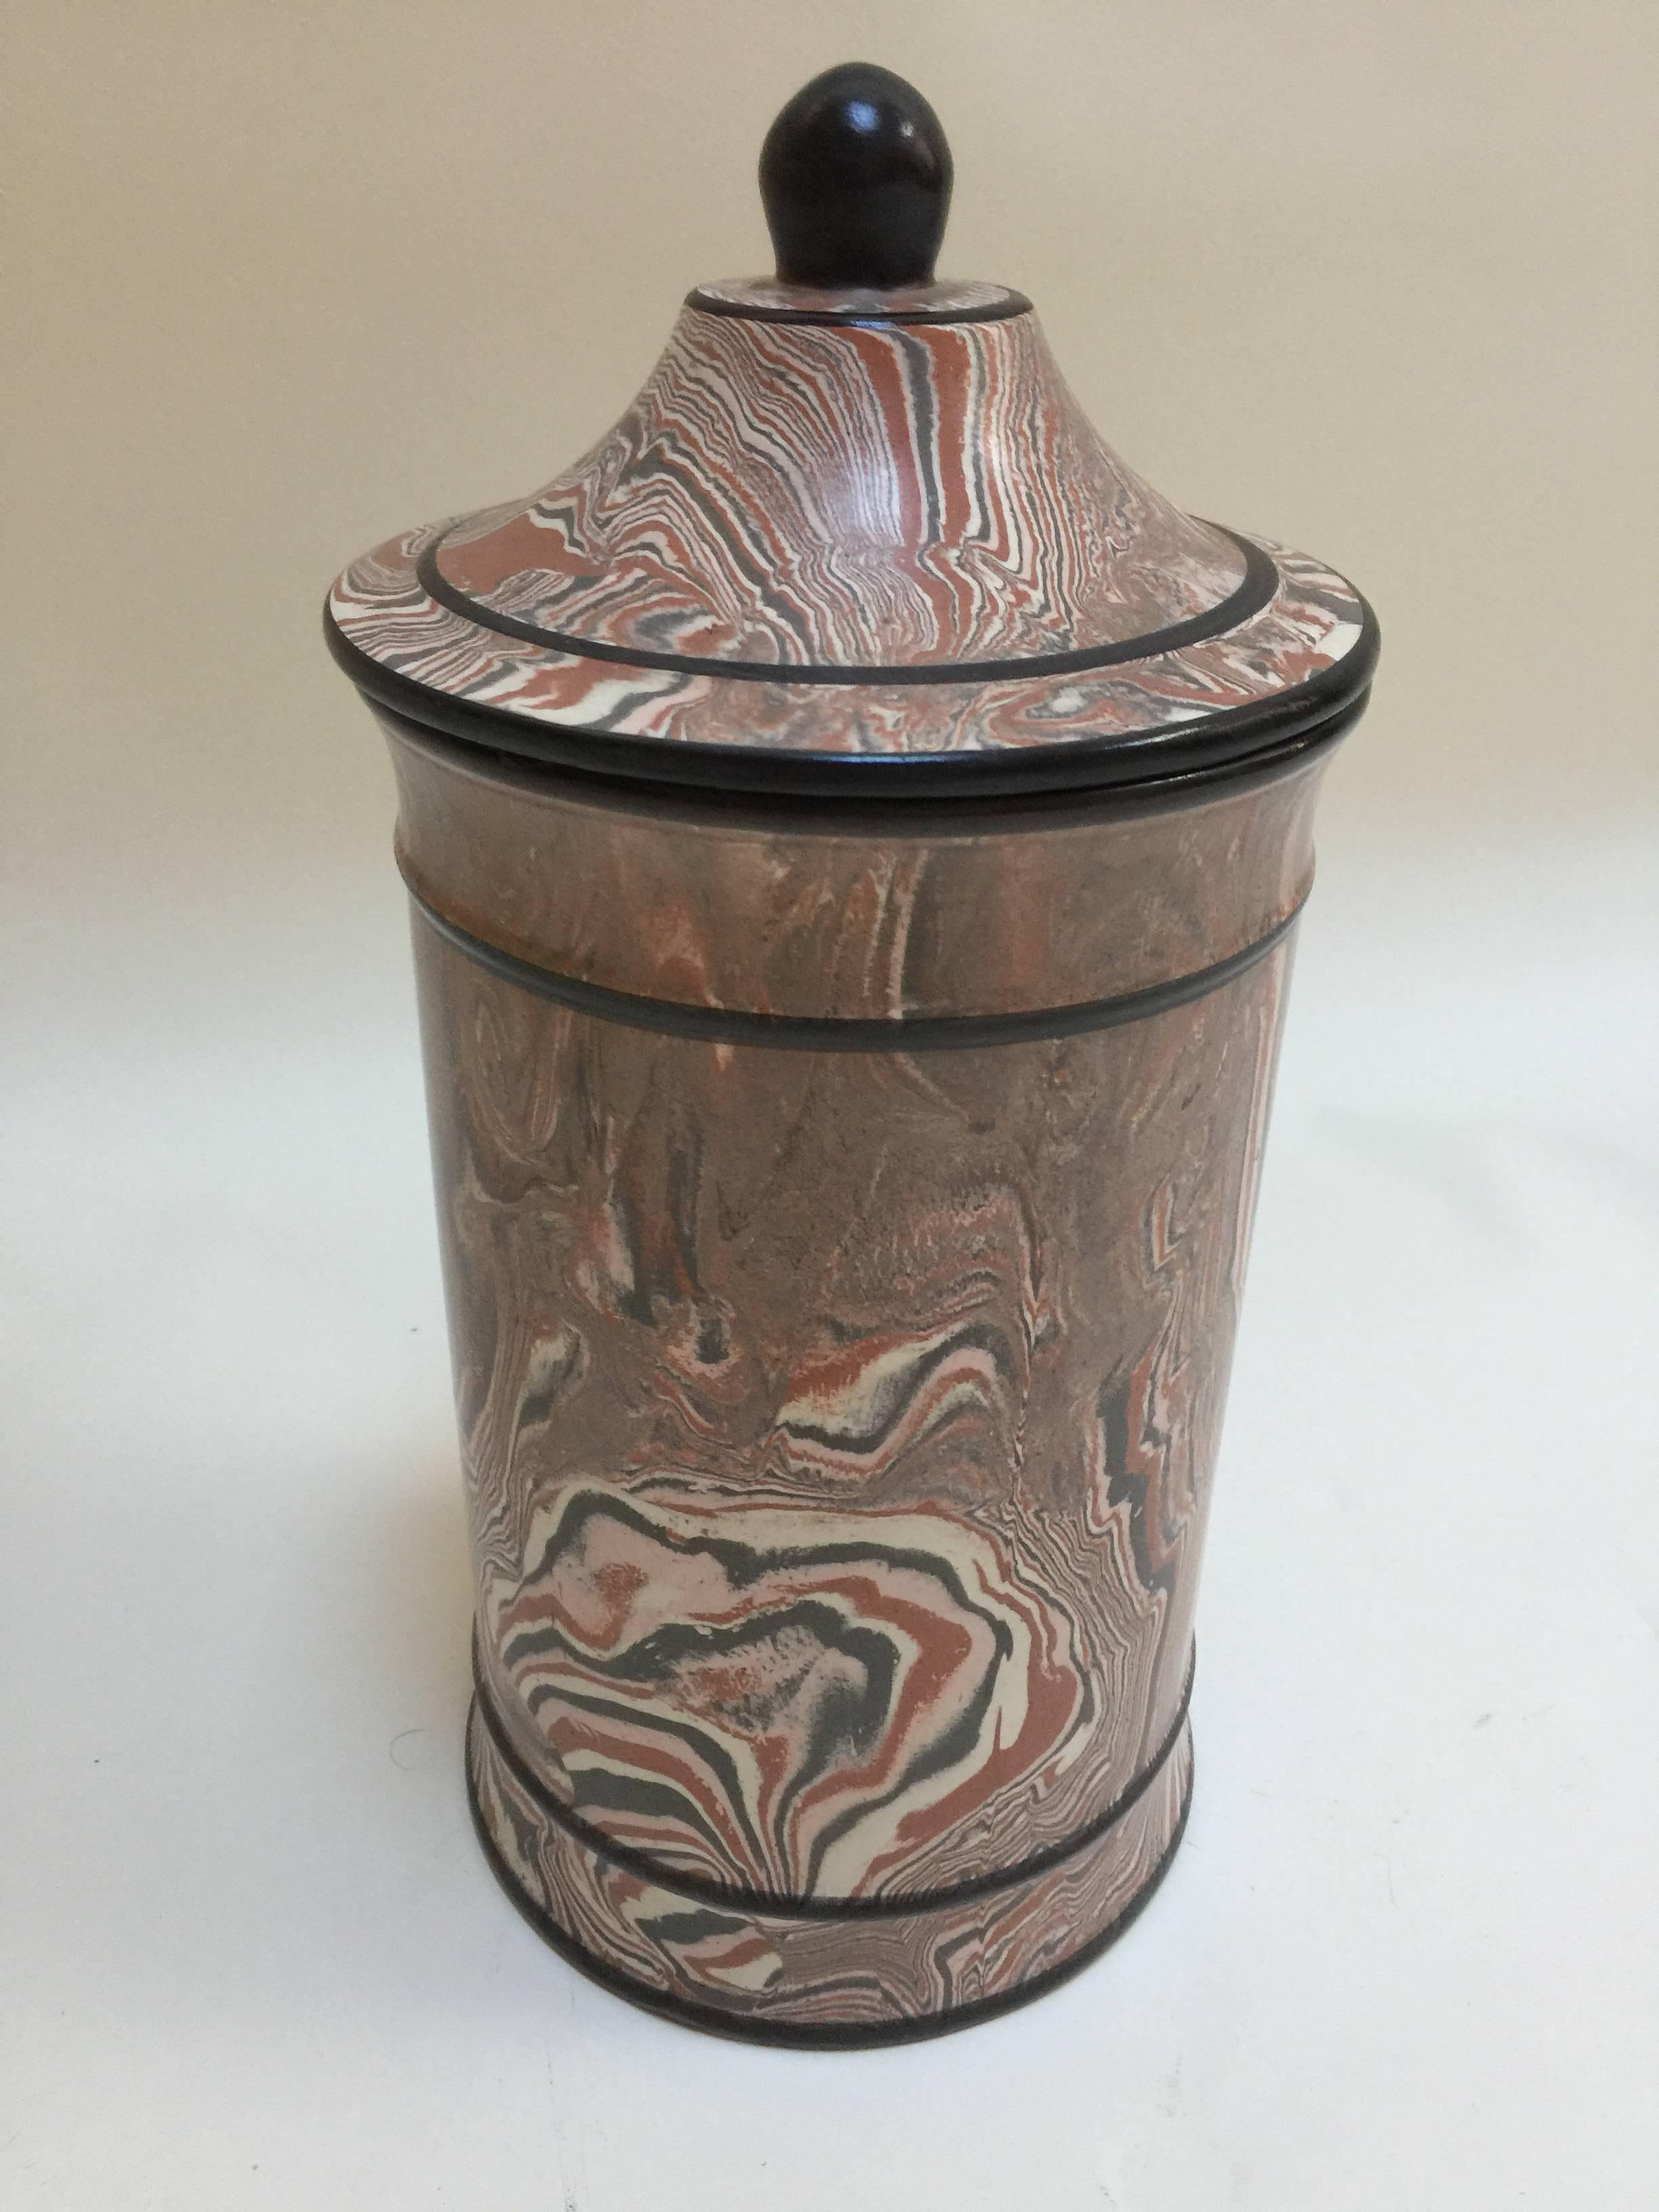 Marbleized pottery cookie jar made in Italy for Neiman Marcus. Gray and pink swirls with black trim, circa 1970s. Excellent condition.